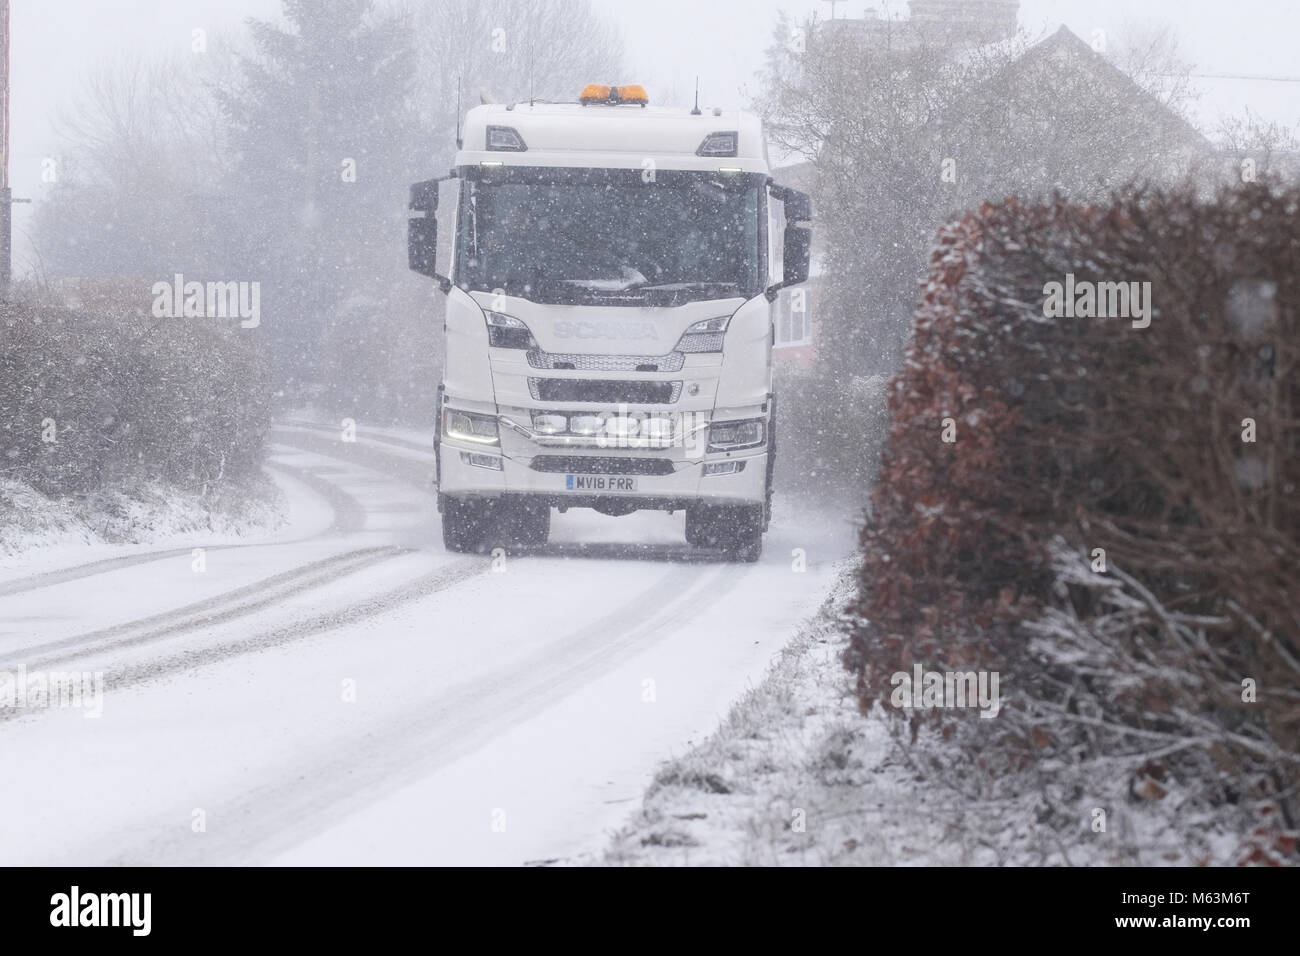 Titley, Herefordshire, UK - Wednesday 28th February 2018 - HGV lorry  driving in heavy snow showers making driving conditions hazardous in rural Herefordshire. Photo Steven May / Alamy Live News Stock Photo